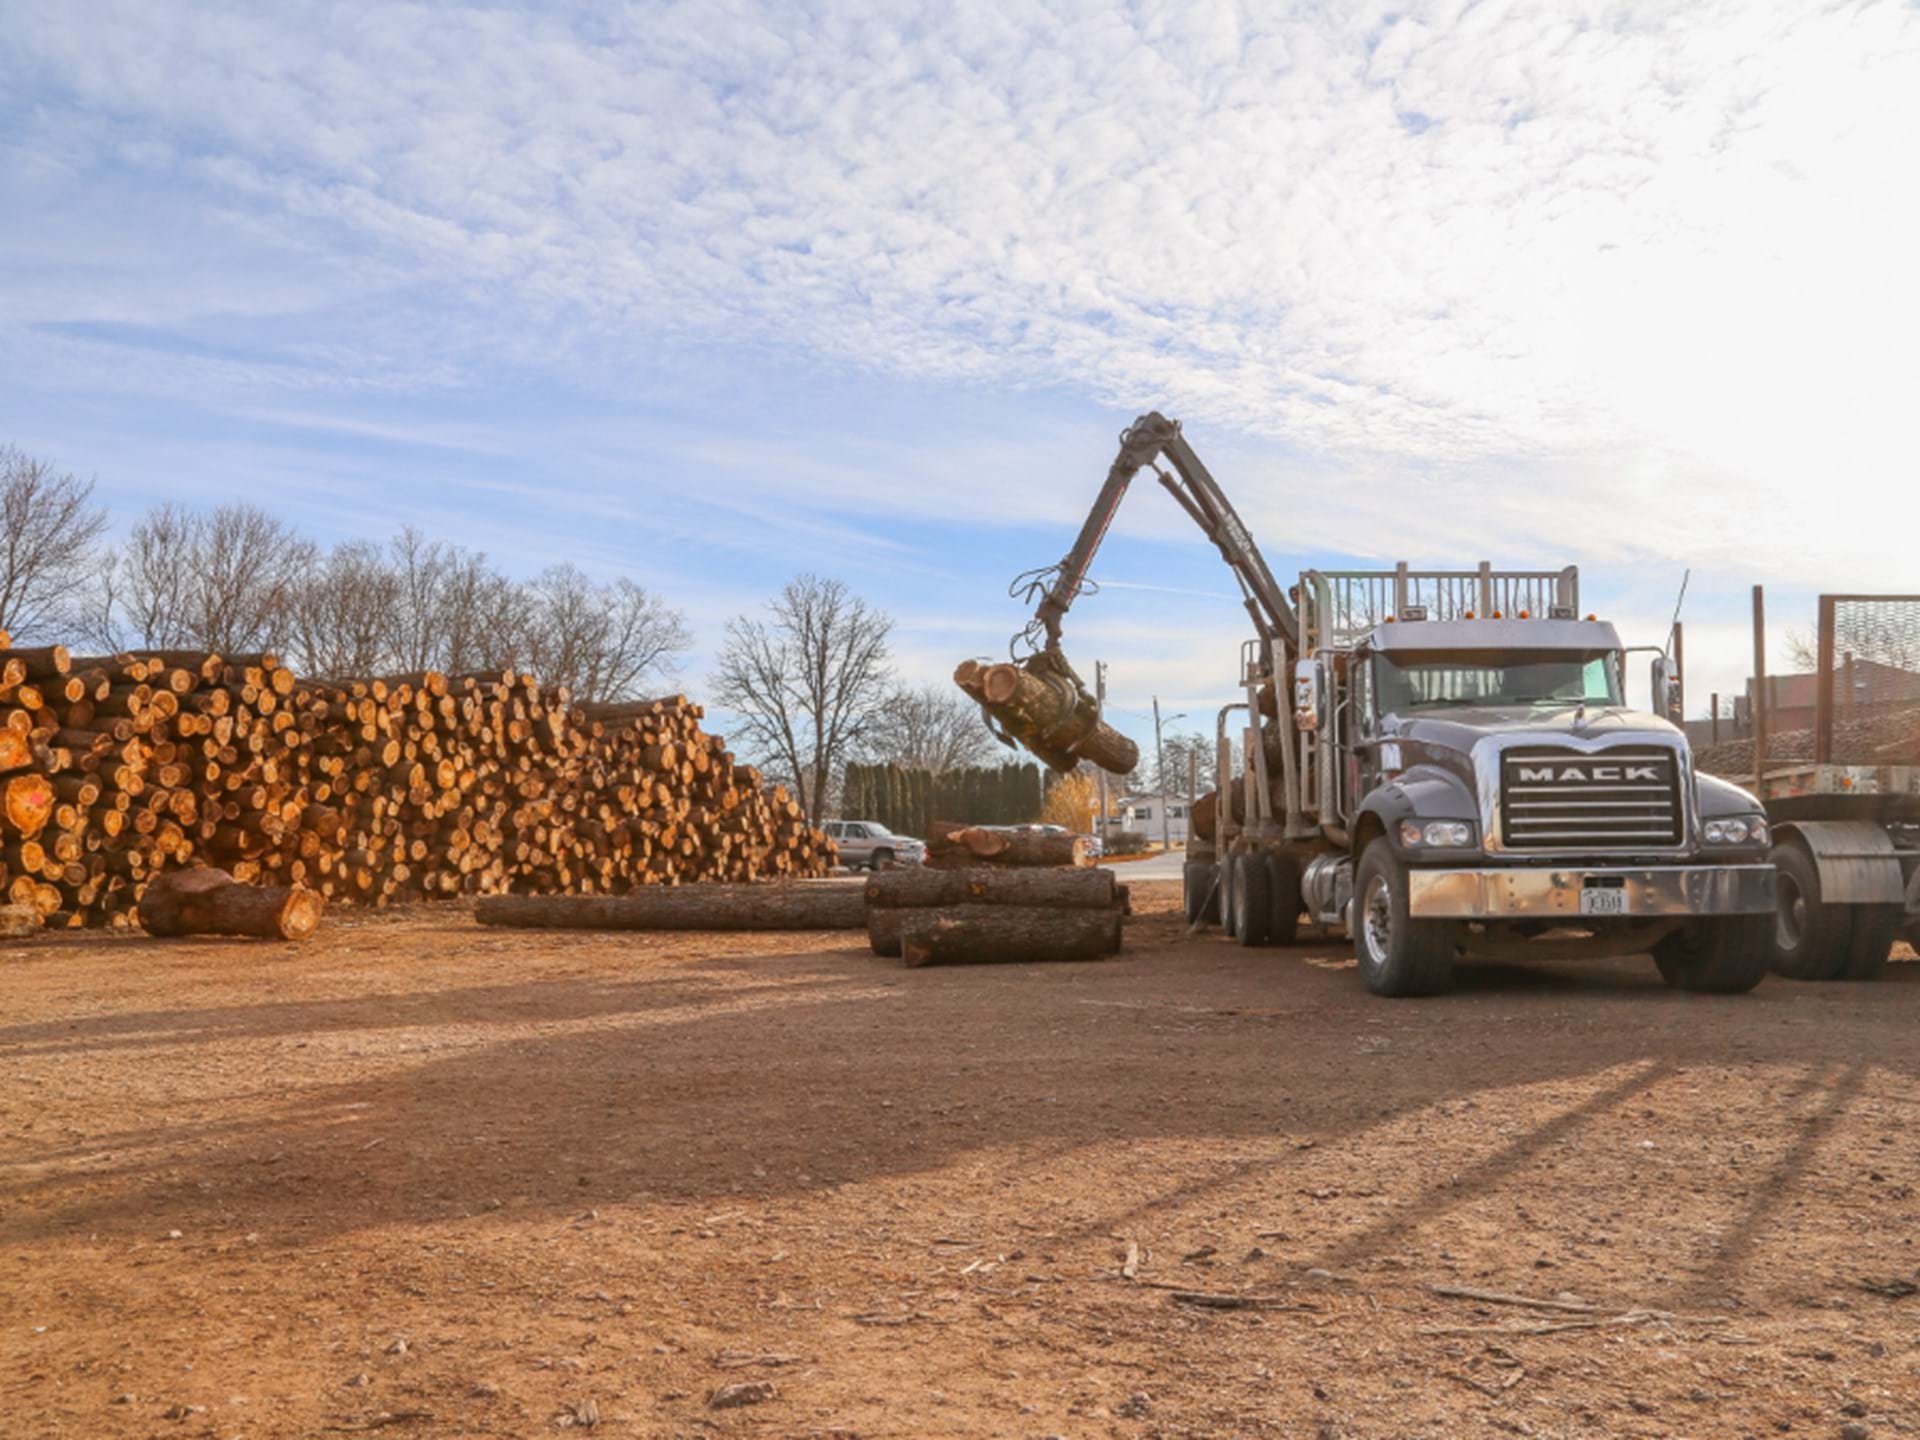 Unloading logs. - Kendrick Forest Products, a division of Kendrick, Inc.